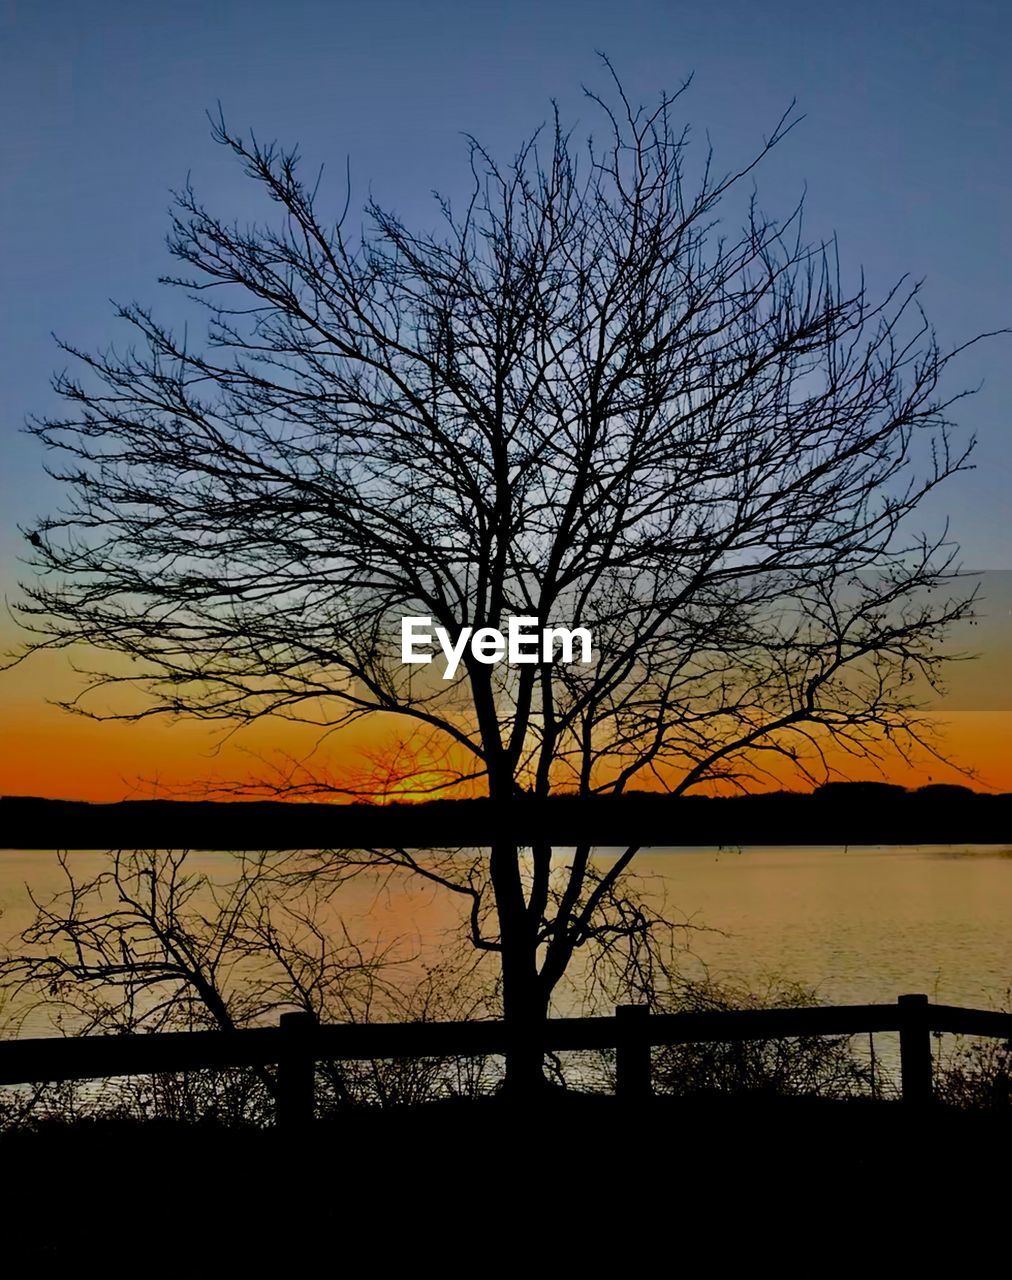 SILHOUETTE TREE BY LAKE AGAINST SKY DURING SUNSET